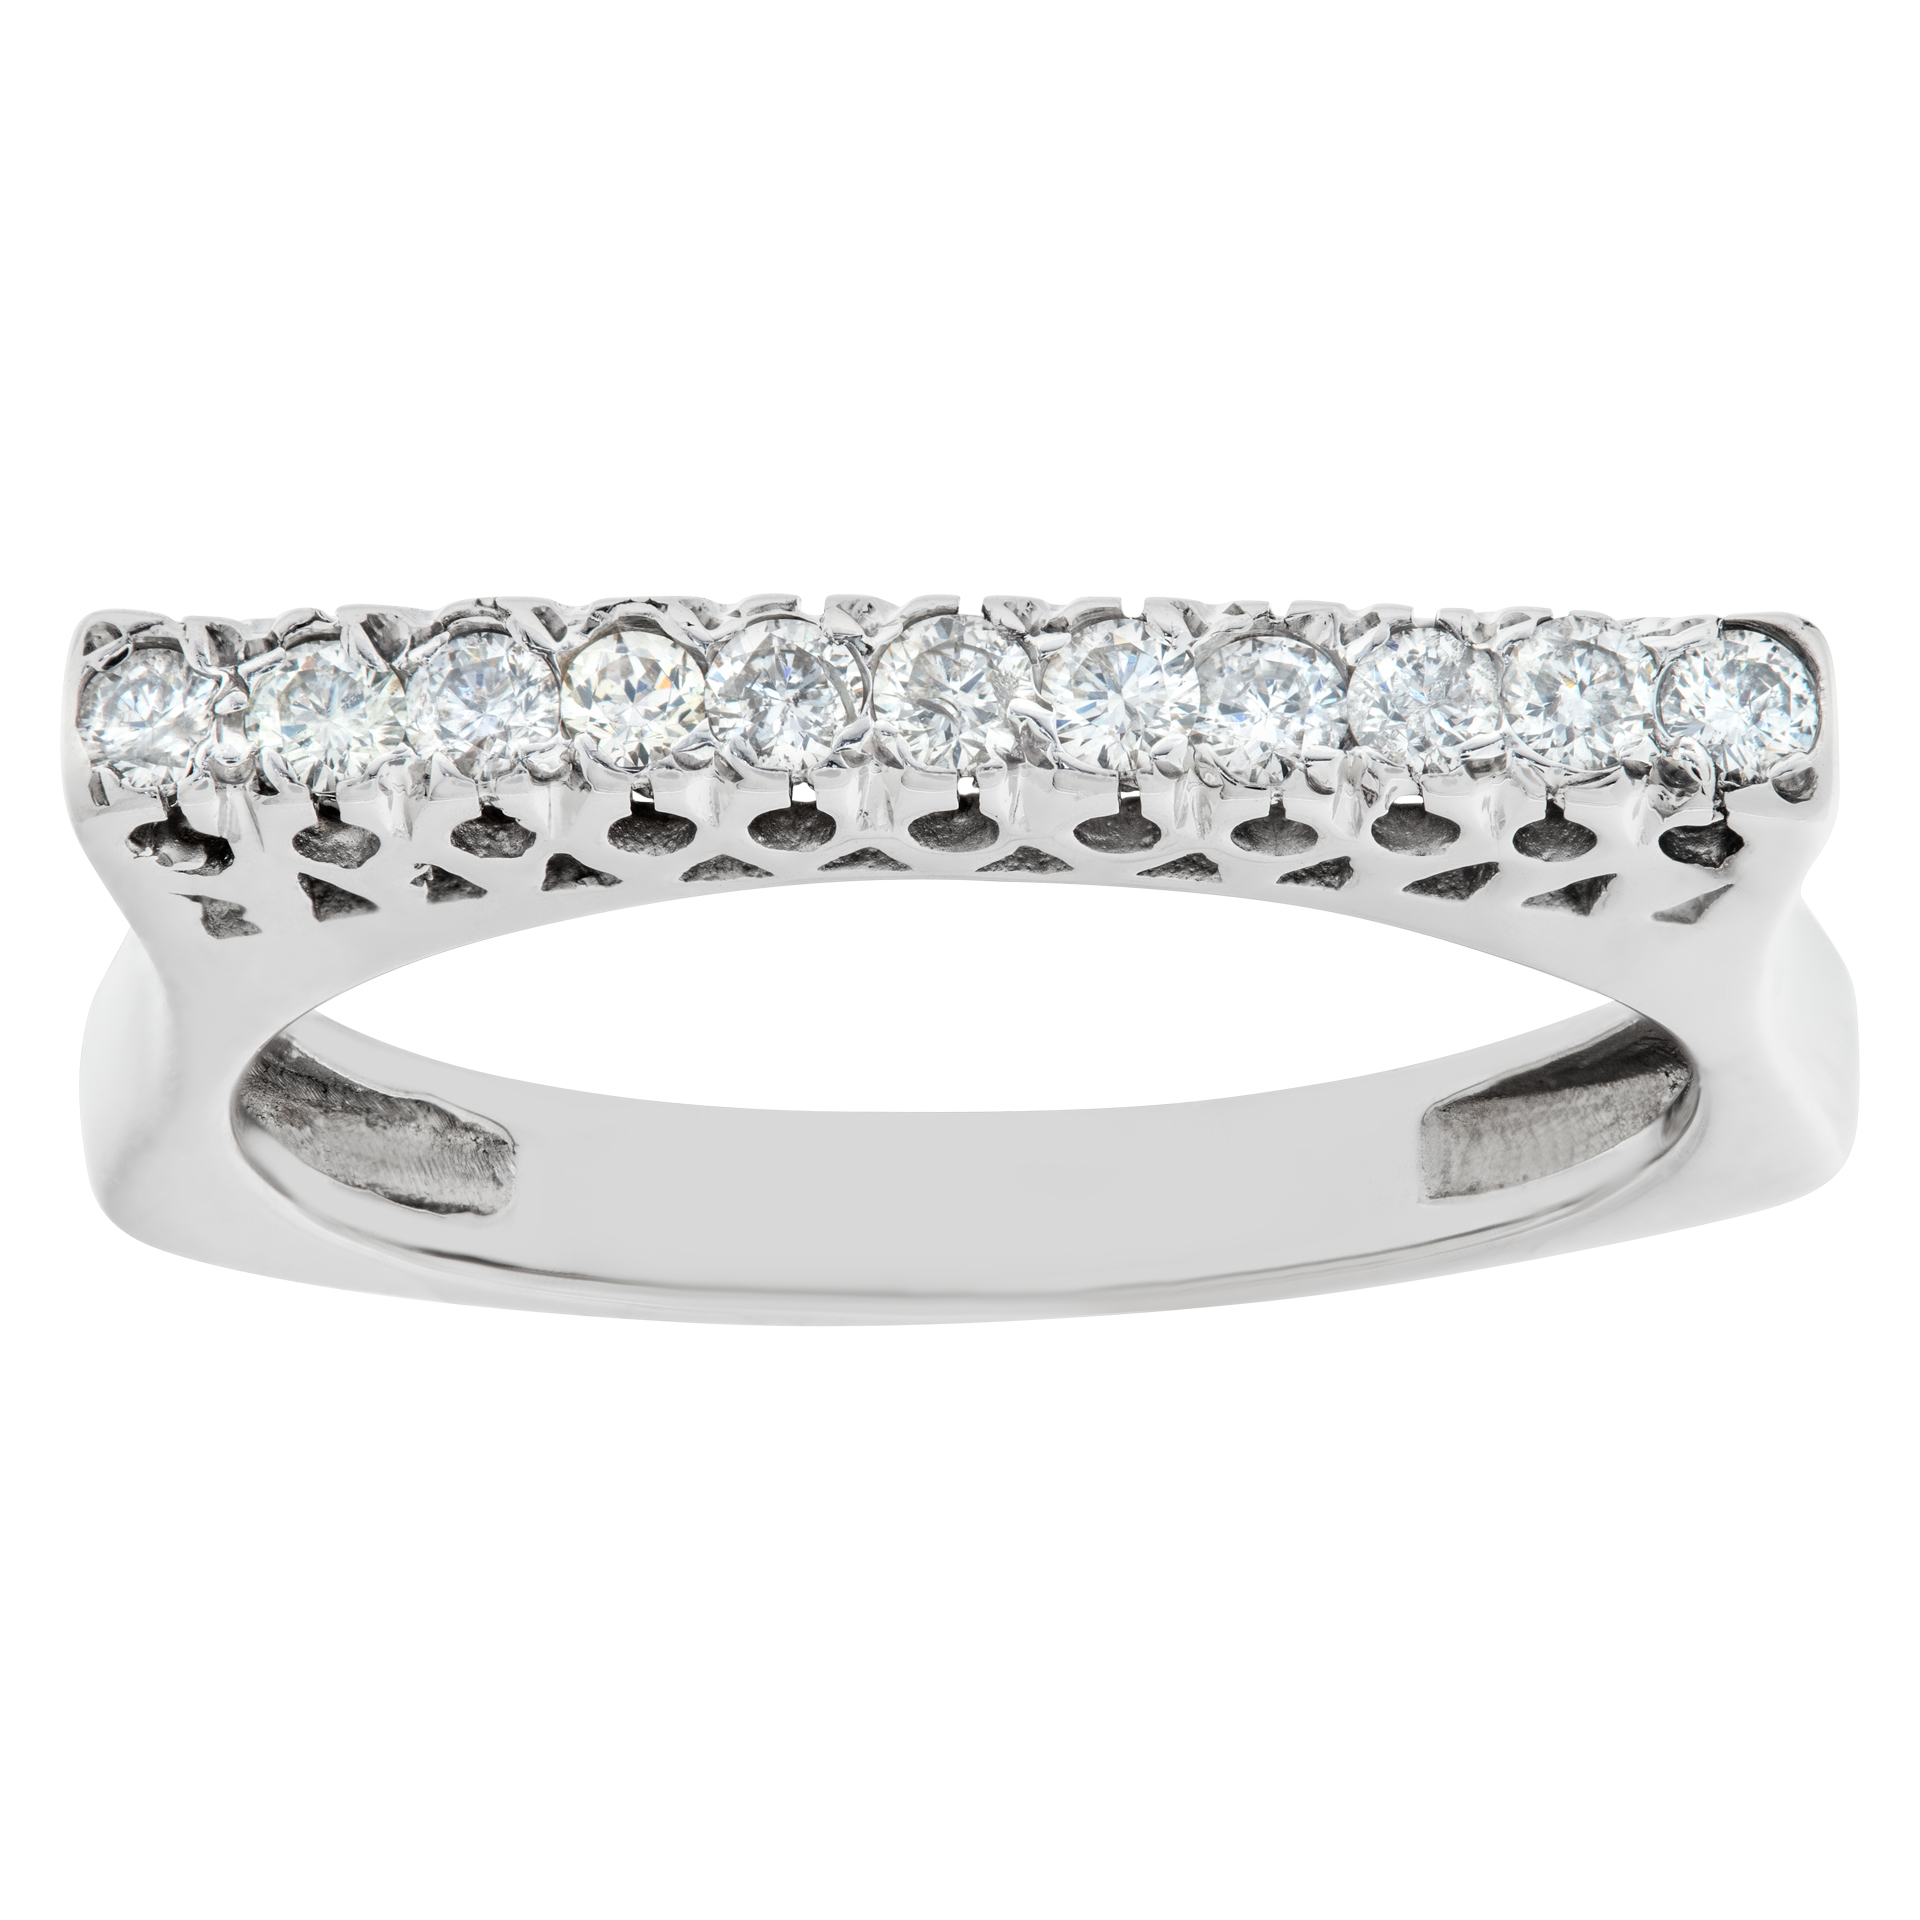 Single row diamond ring in 18k white gold. 0.33 carat (I-J color, SI1 clarity). Size 8 image 1